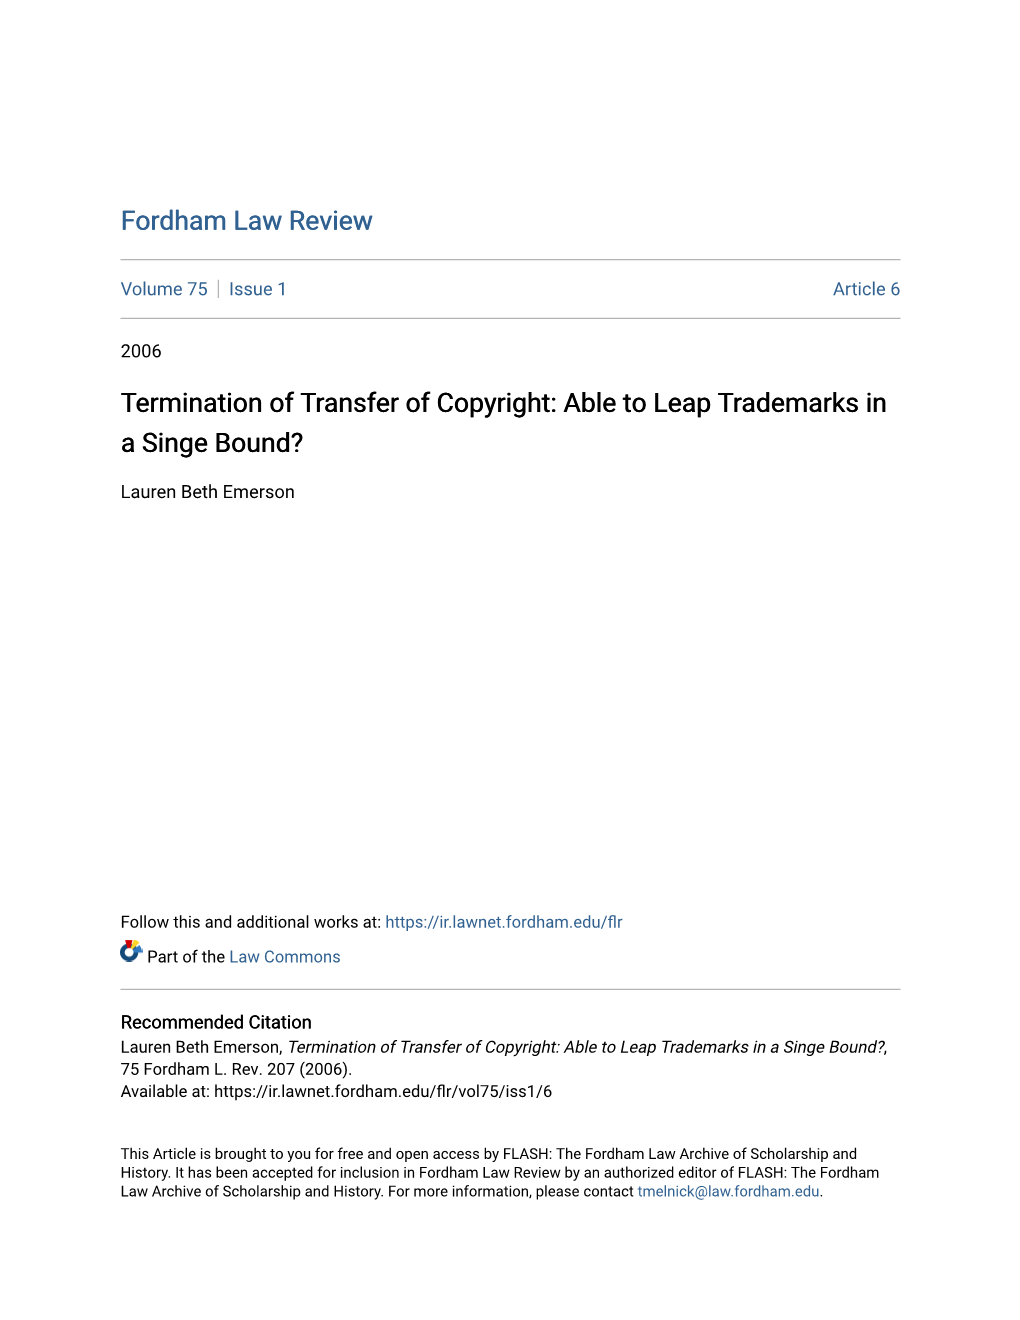 Termination of Transfer of Copyright: Able to Leap Trademarks in a Singe Bound?